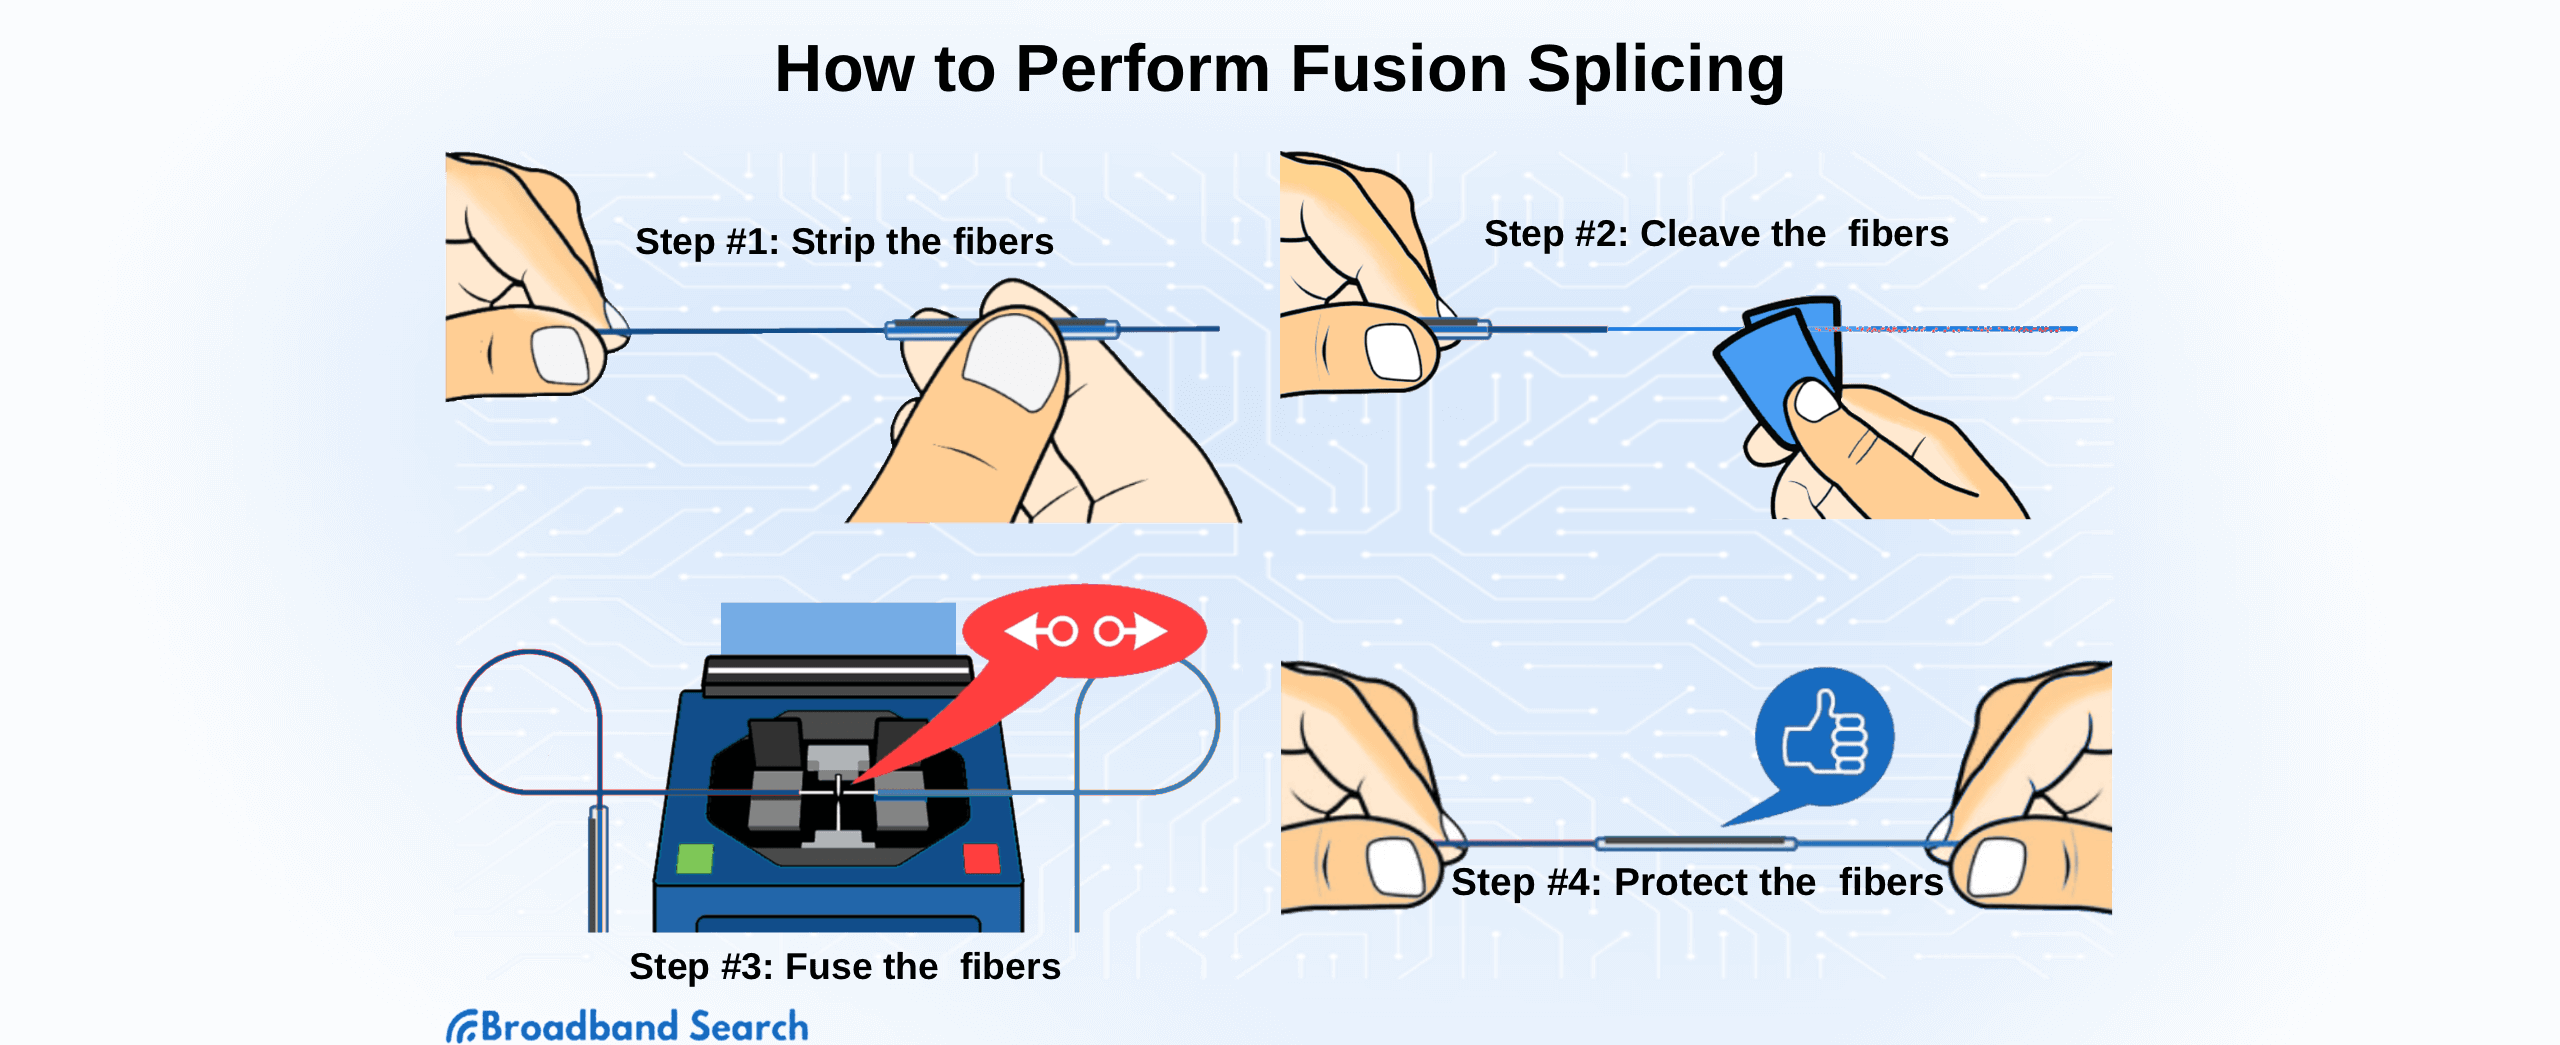 How to perform fusion splicing